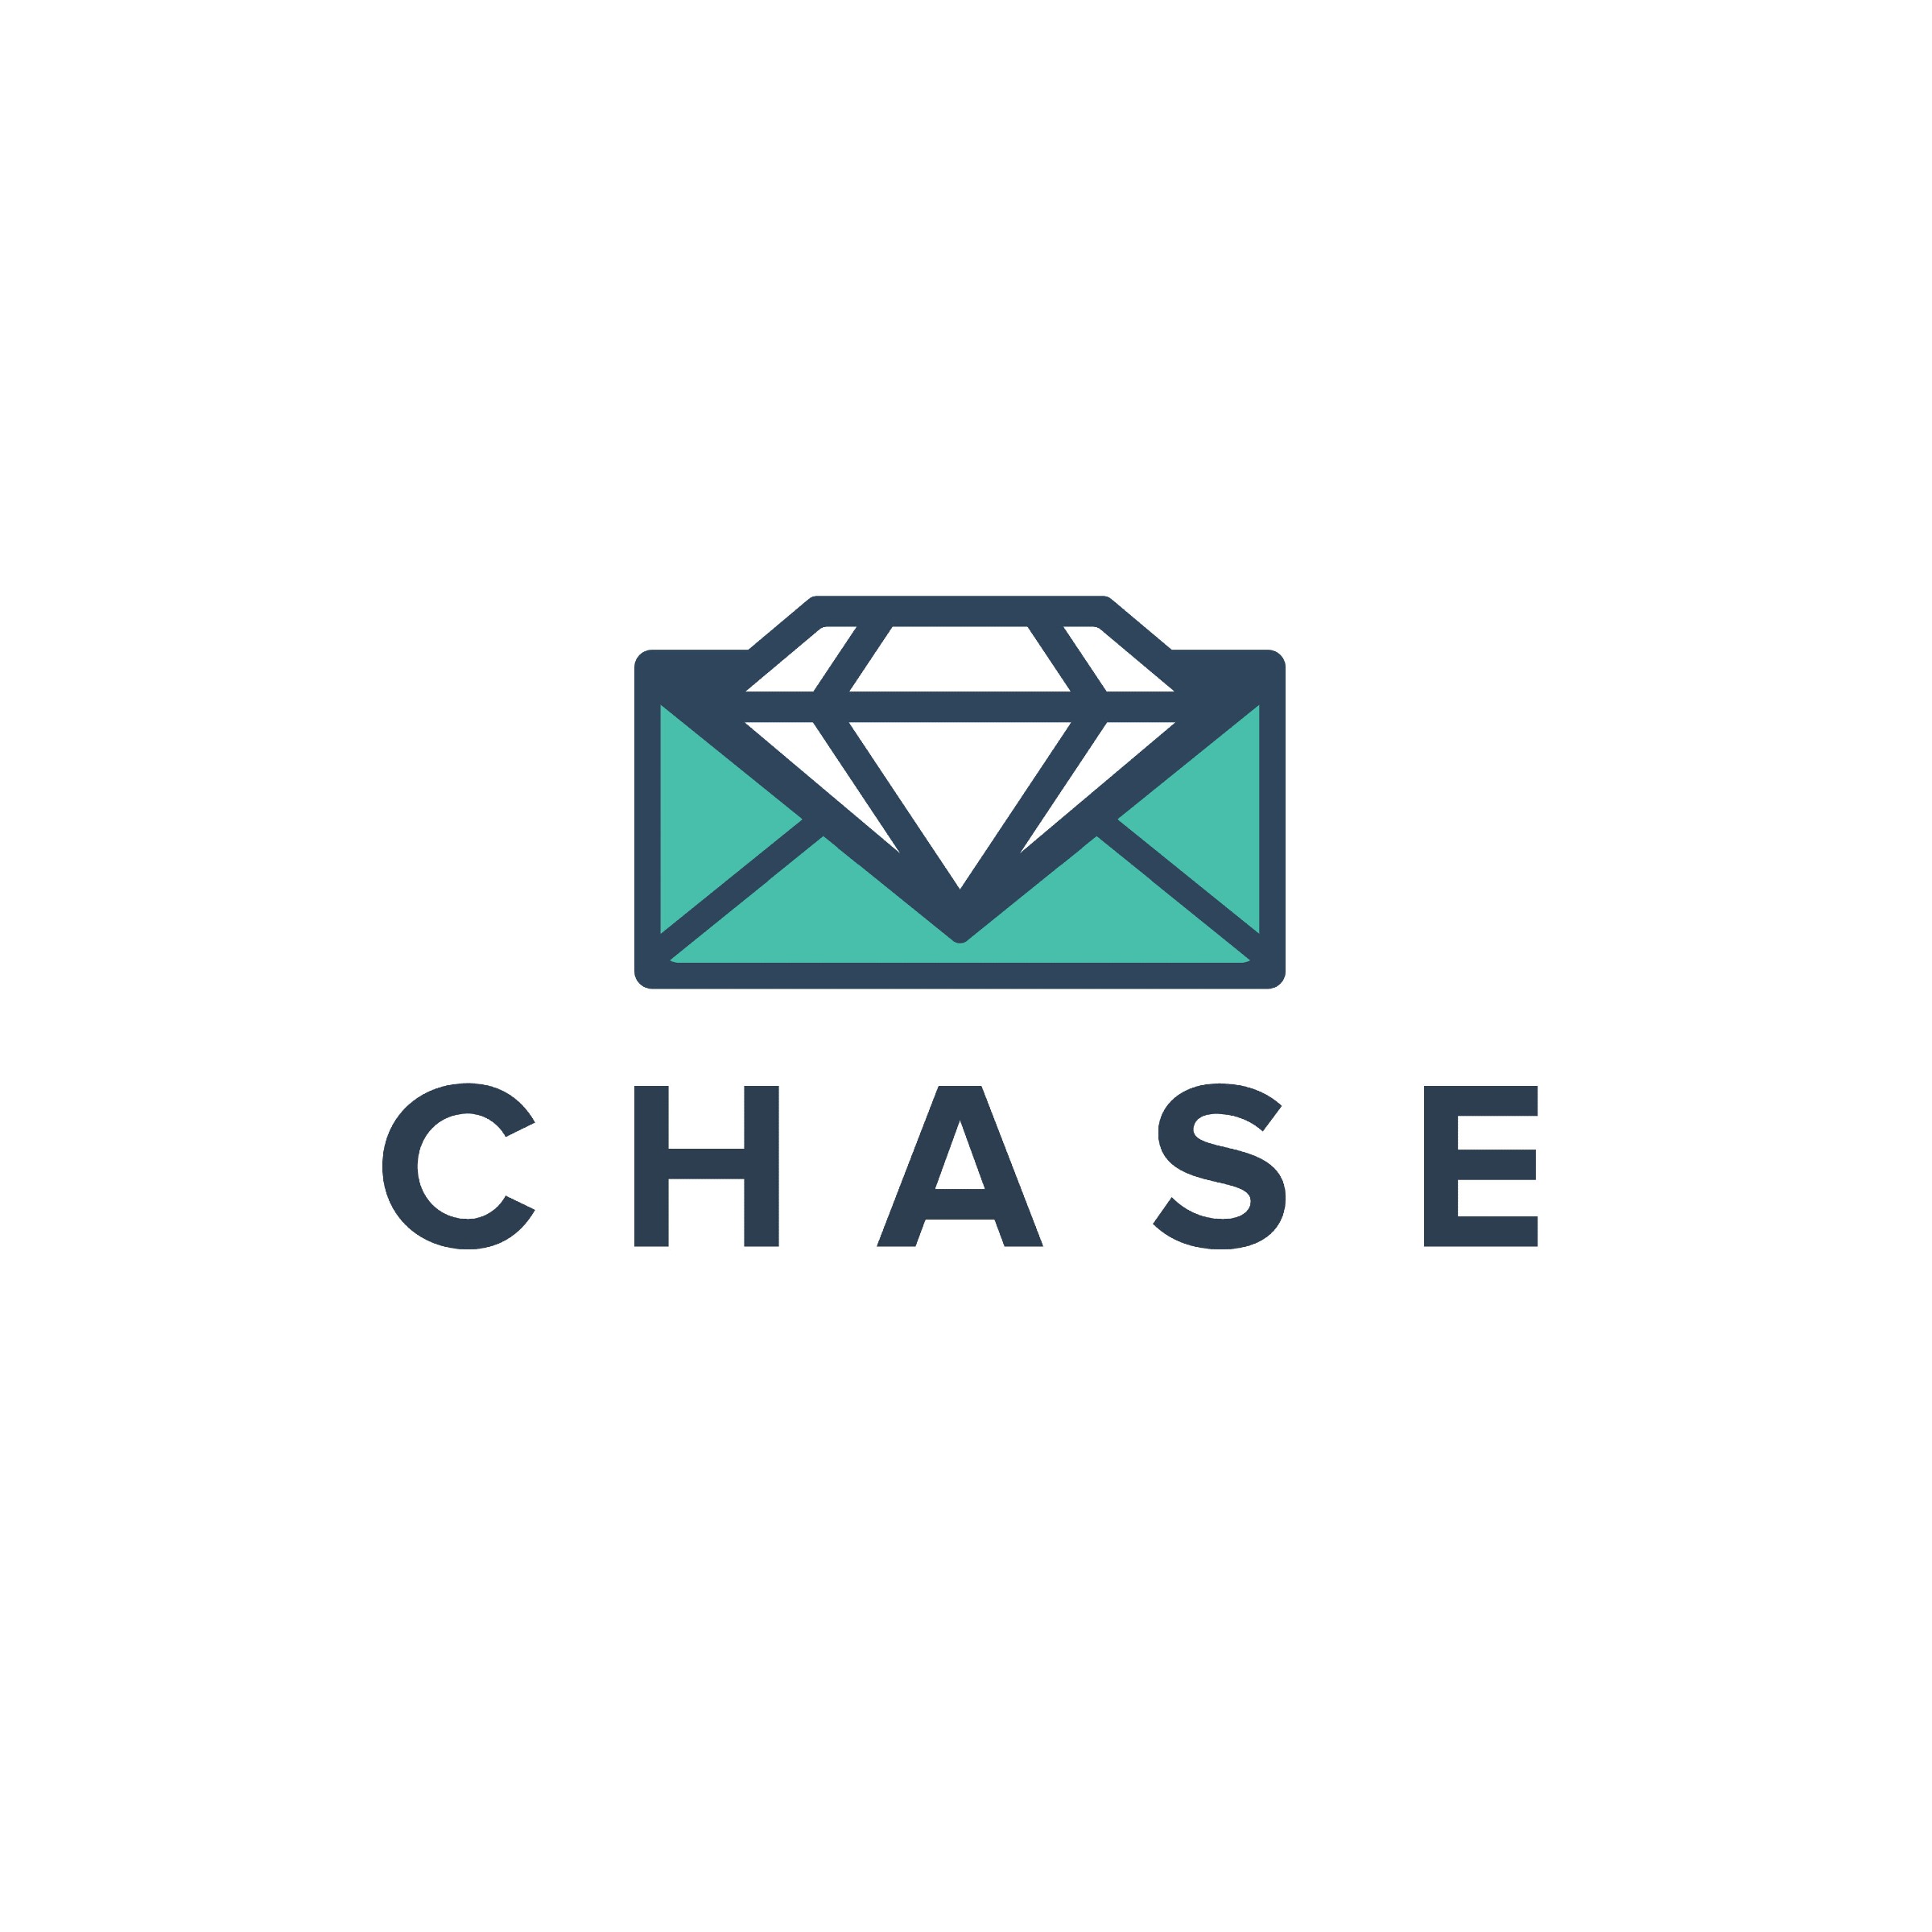 Ecommerce Email Marketing Course By Chase Dimond - Free Download Course